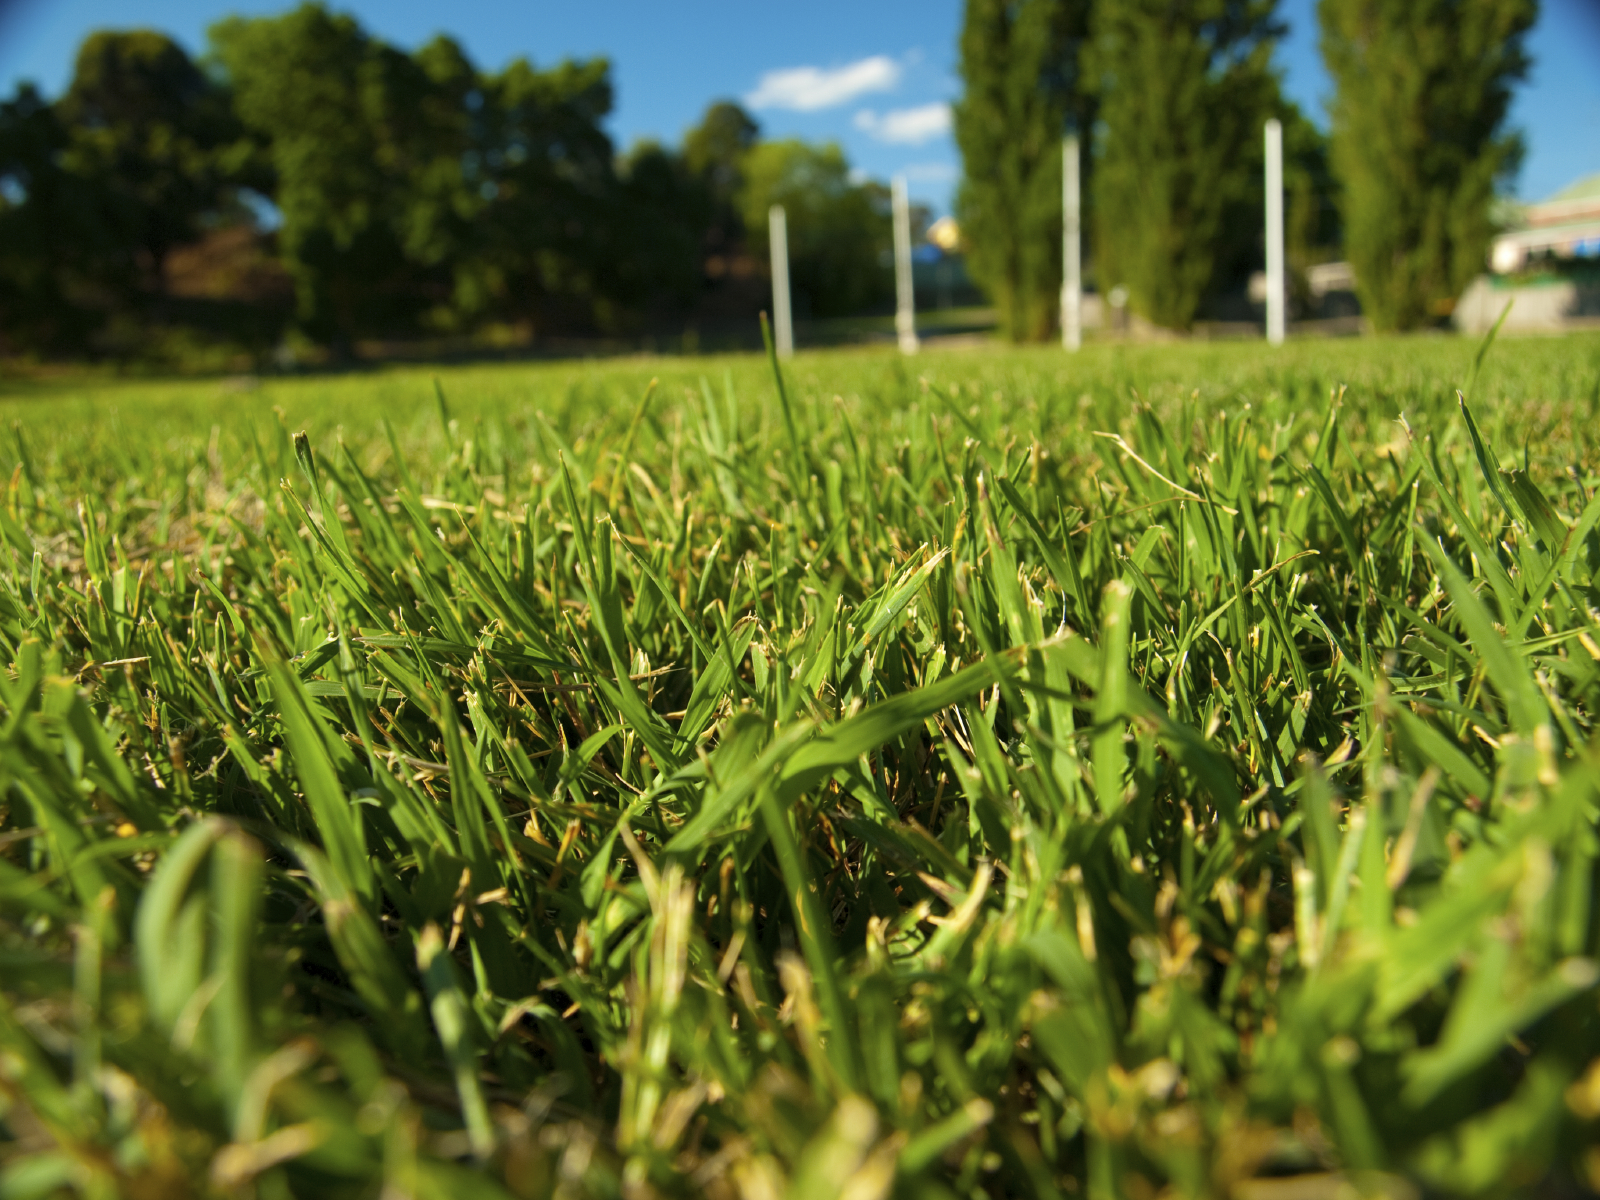 Close up of green grass on a playing field